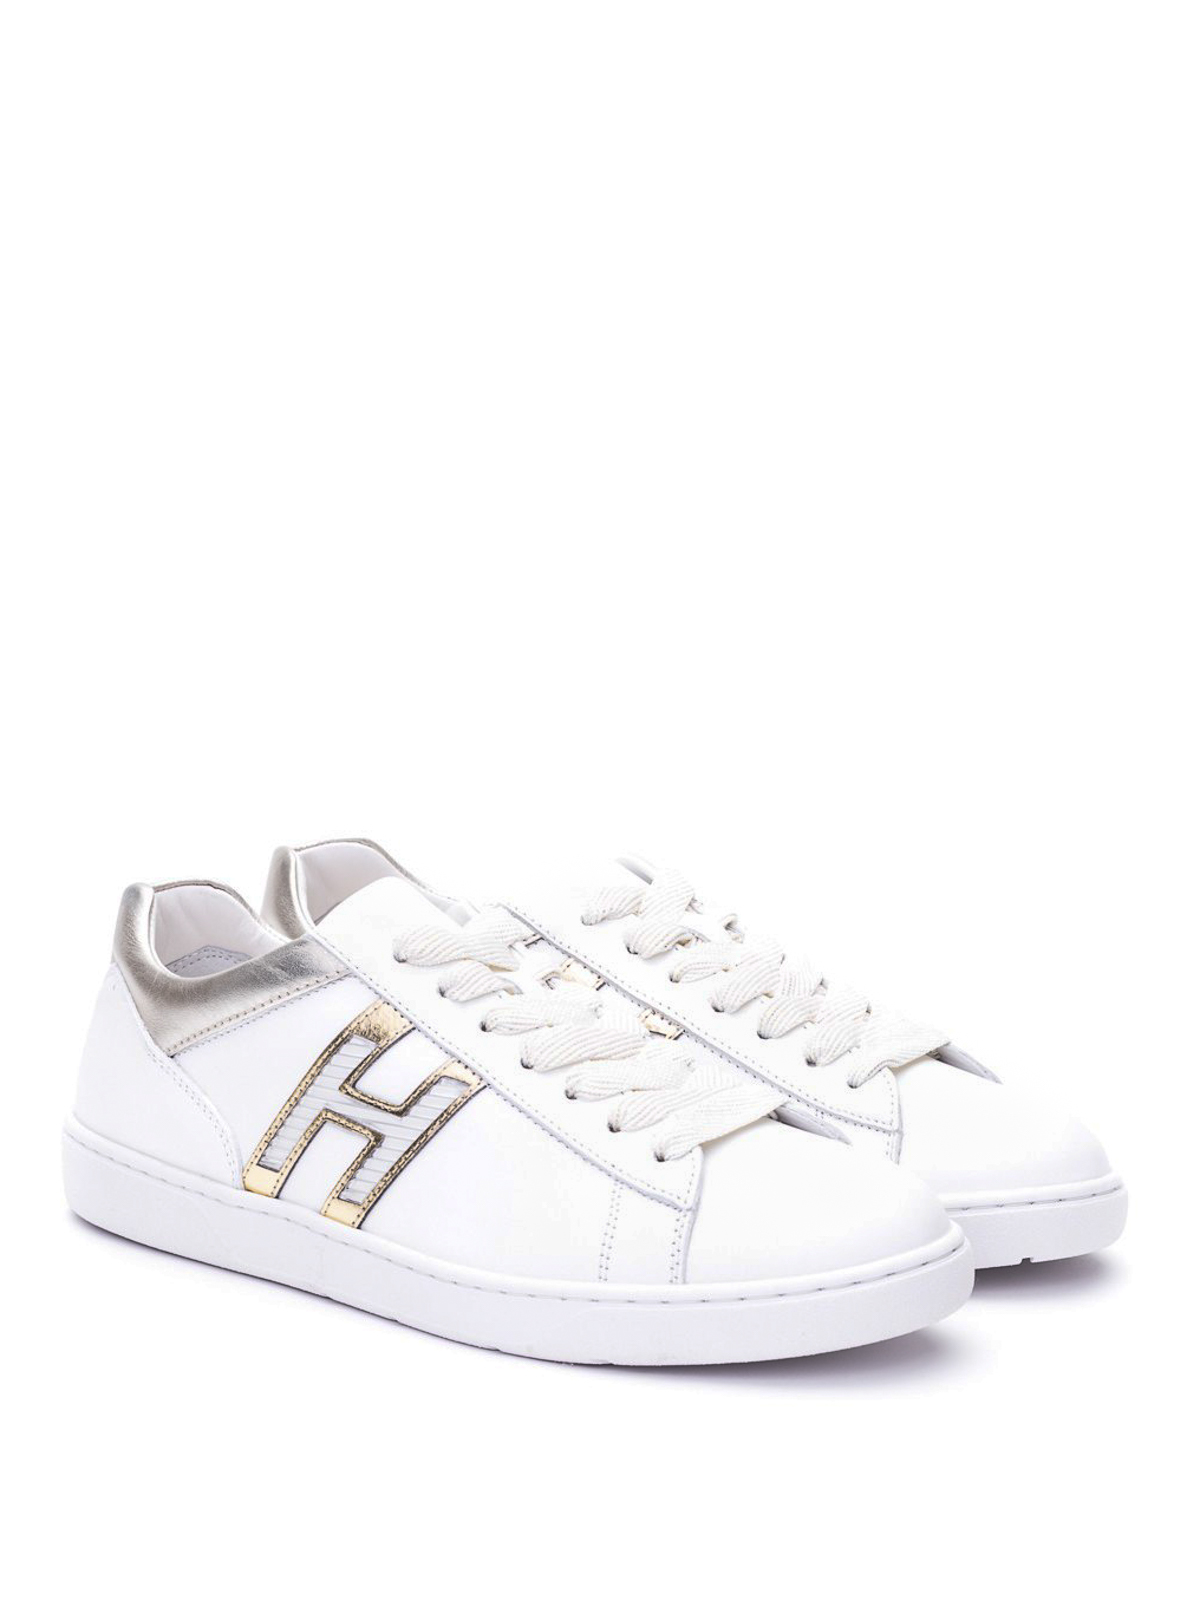 Hogan - H327 white sneakers - trainers 